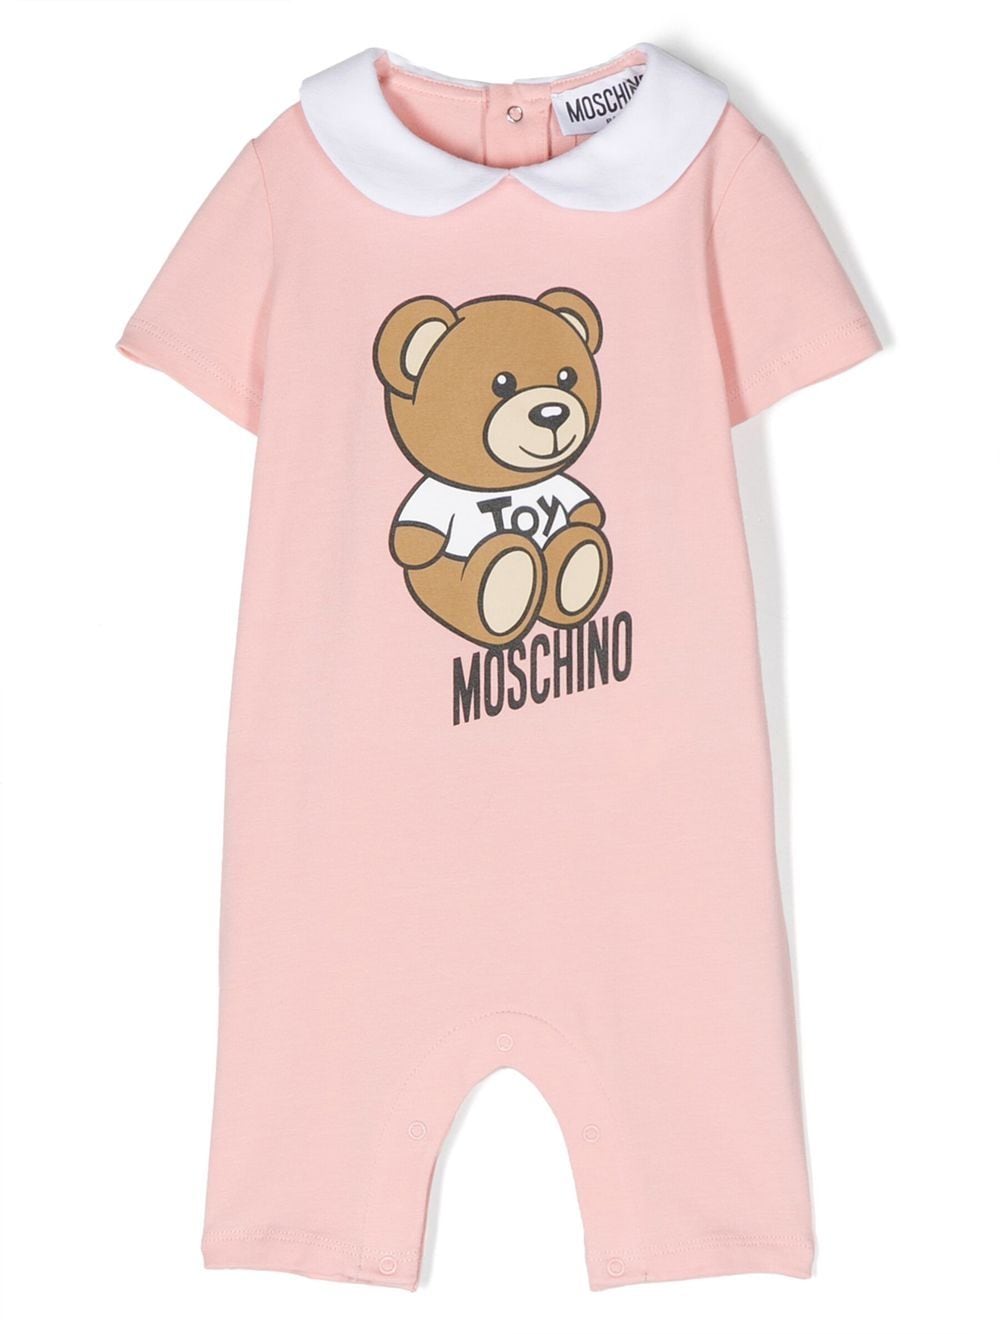 Moschino Pink Romper For Baby Girl With Teddy Bear